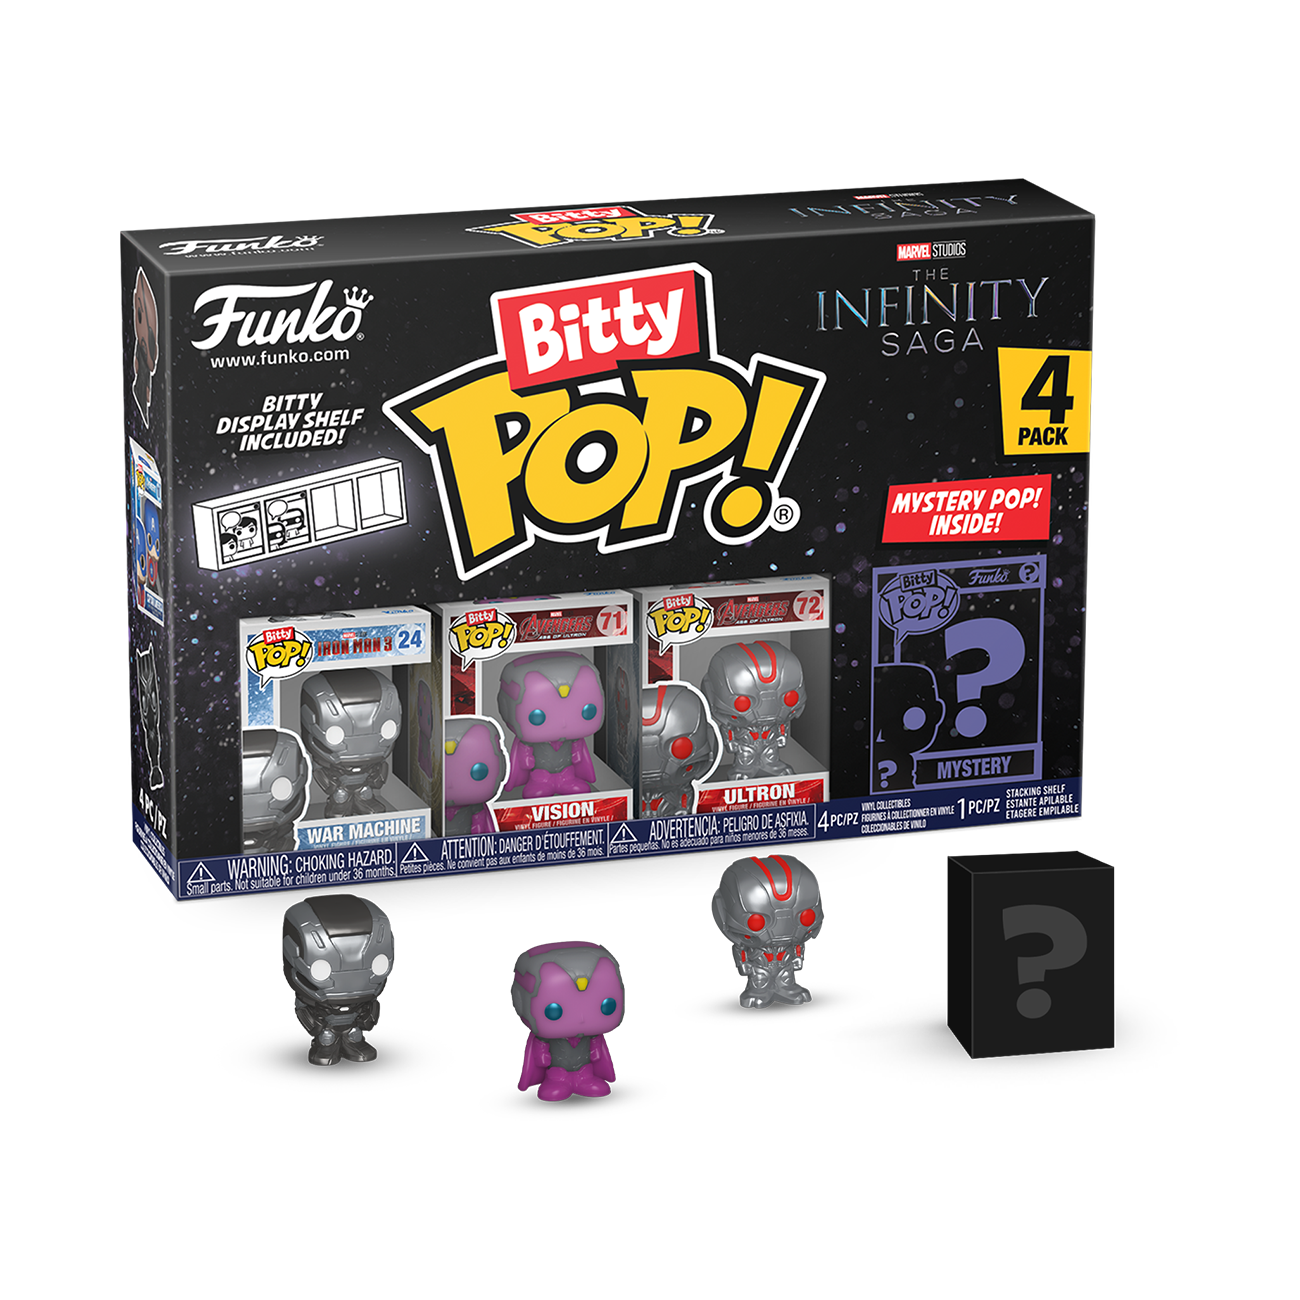 Funko Bitty POP! Marvel (War Machine, Vision, Ultron, and Mystery Pop) 0.9-in Vinyl Figure Set 4-Pack